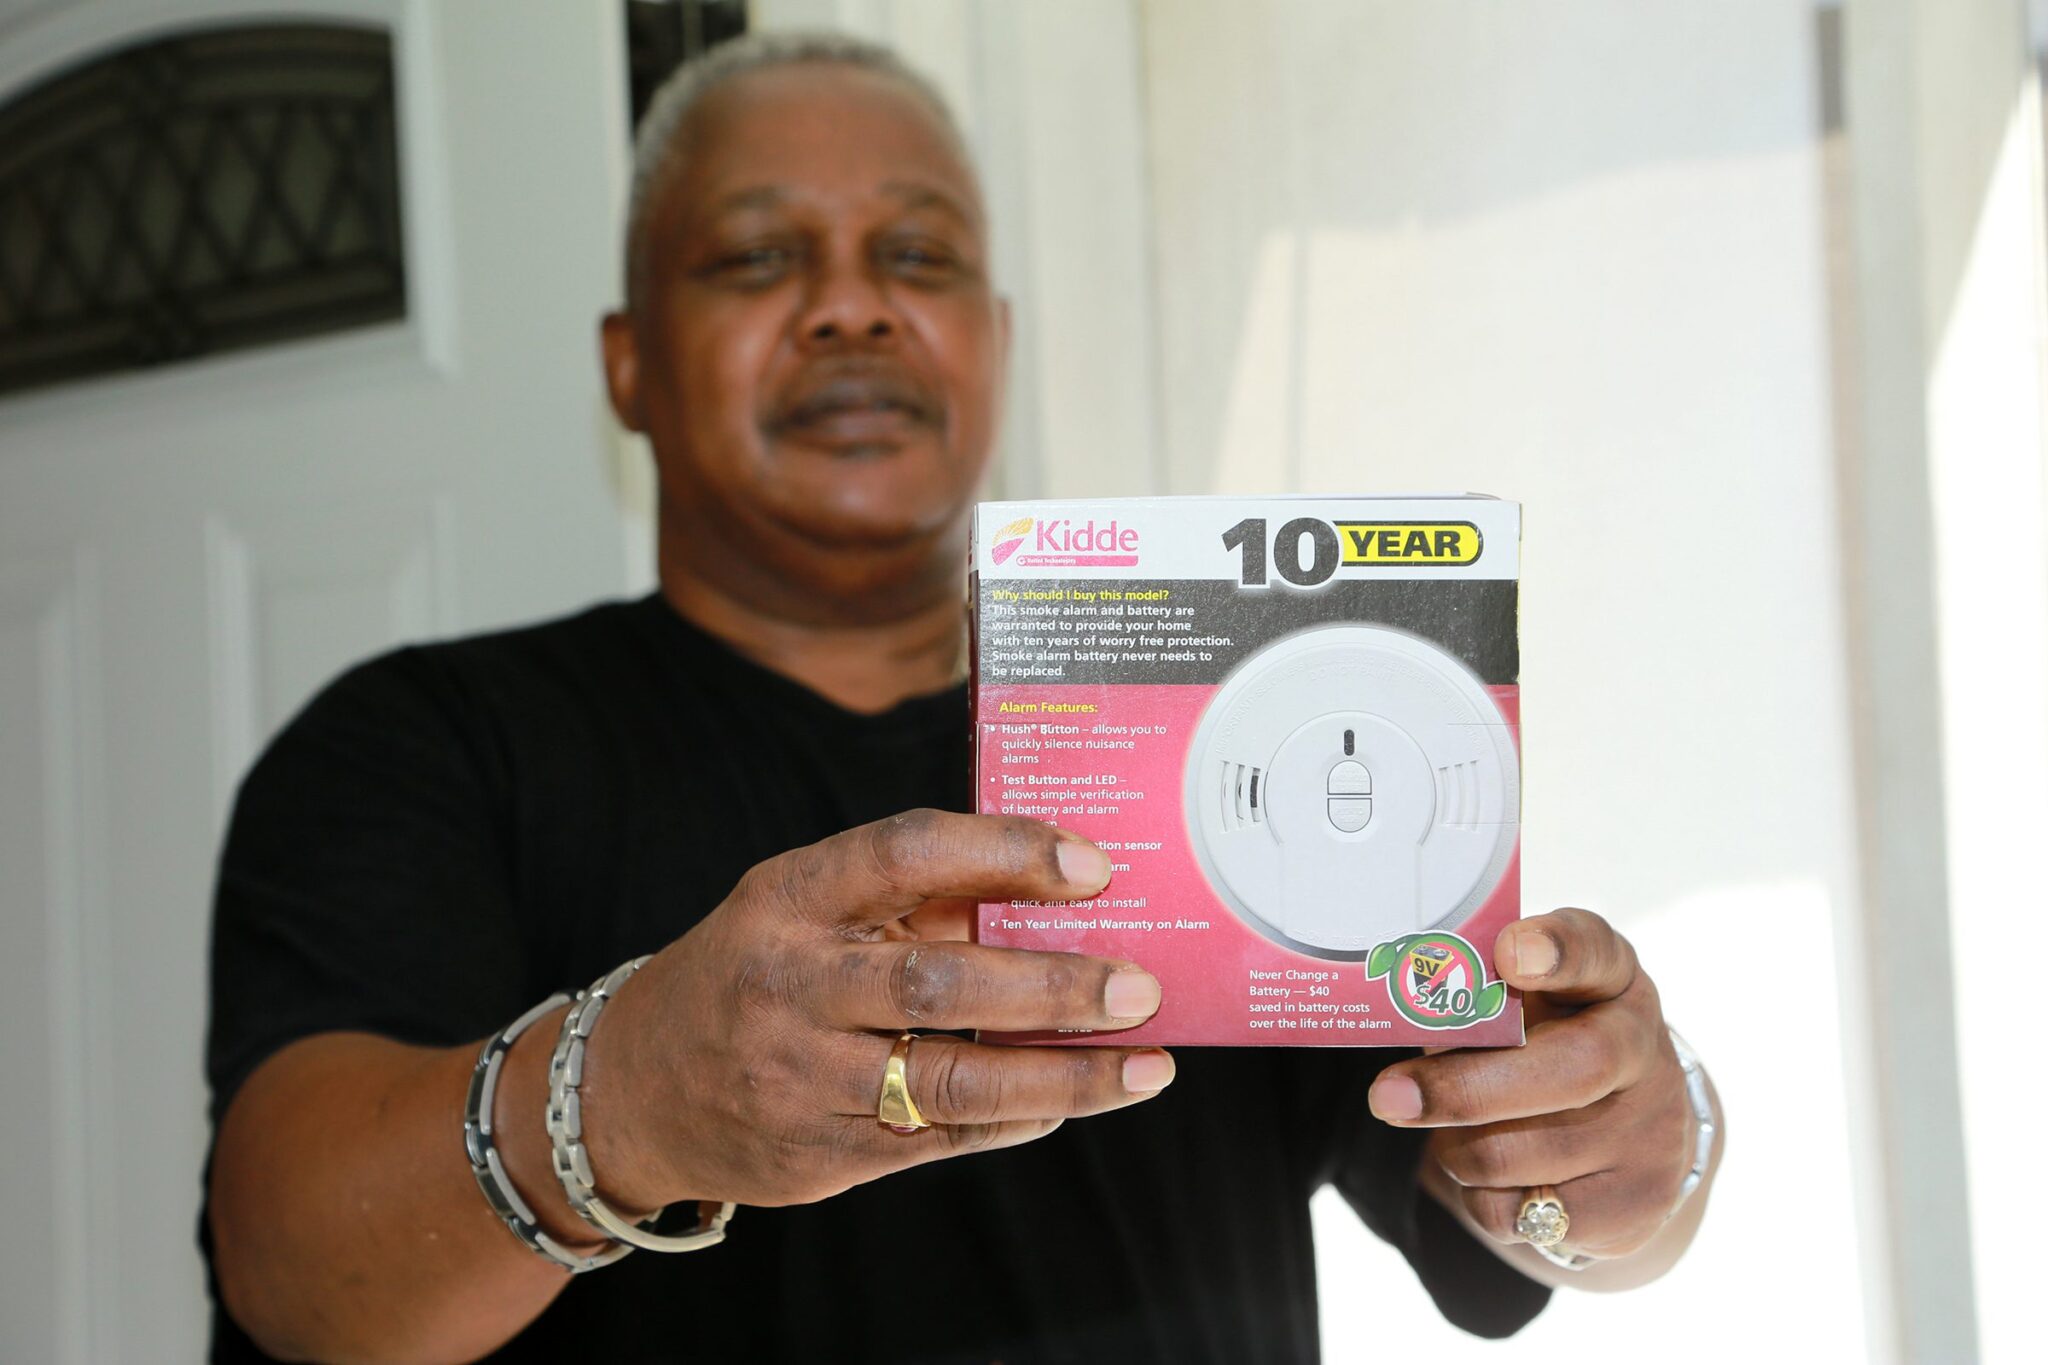 Local electrician and BEC member, Carlton Wilson, shows off one of the four smoke detectors installed in his home through a new partnership between the American Red Cross and Berkeley Electric.